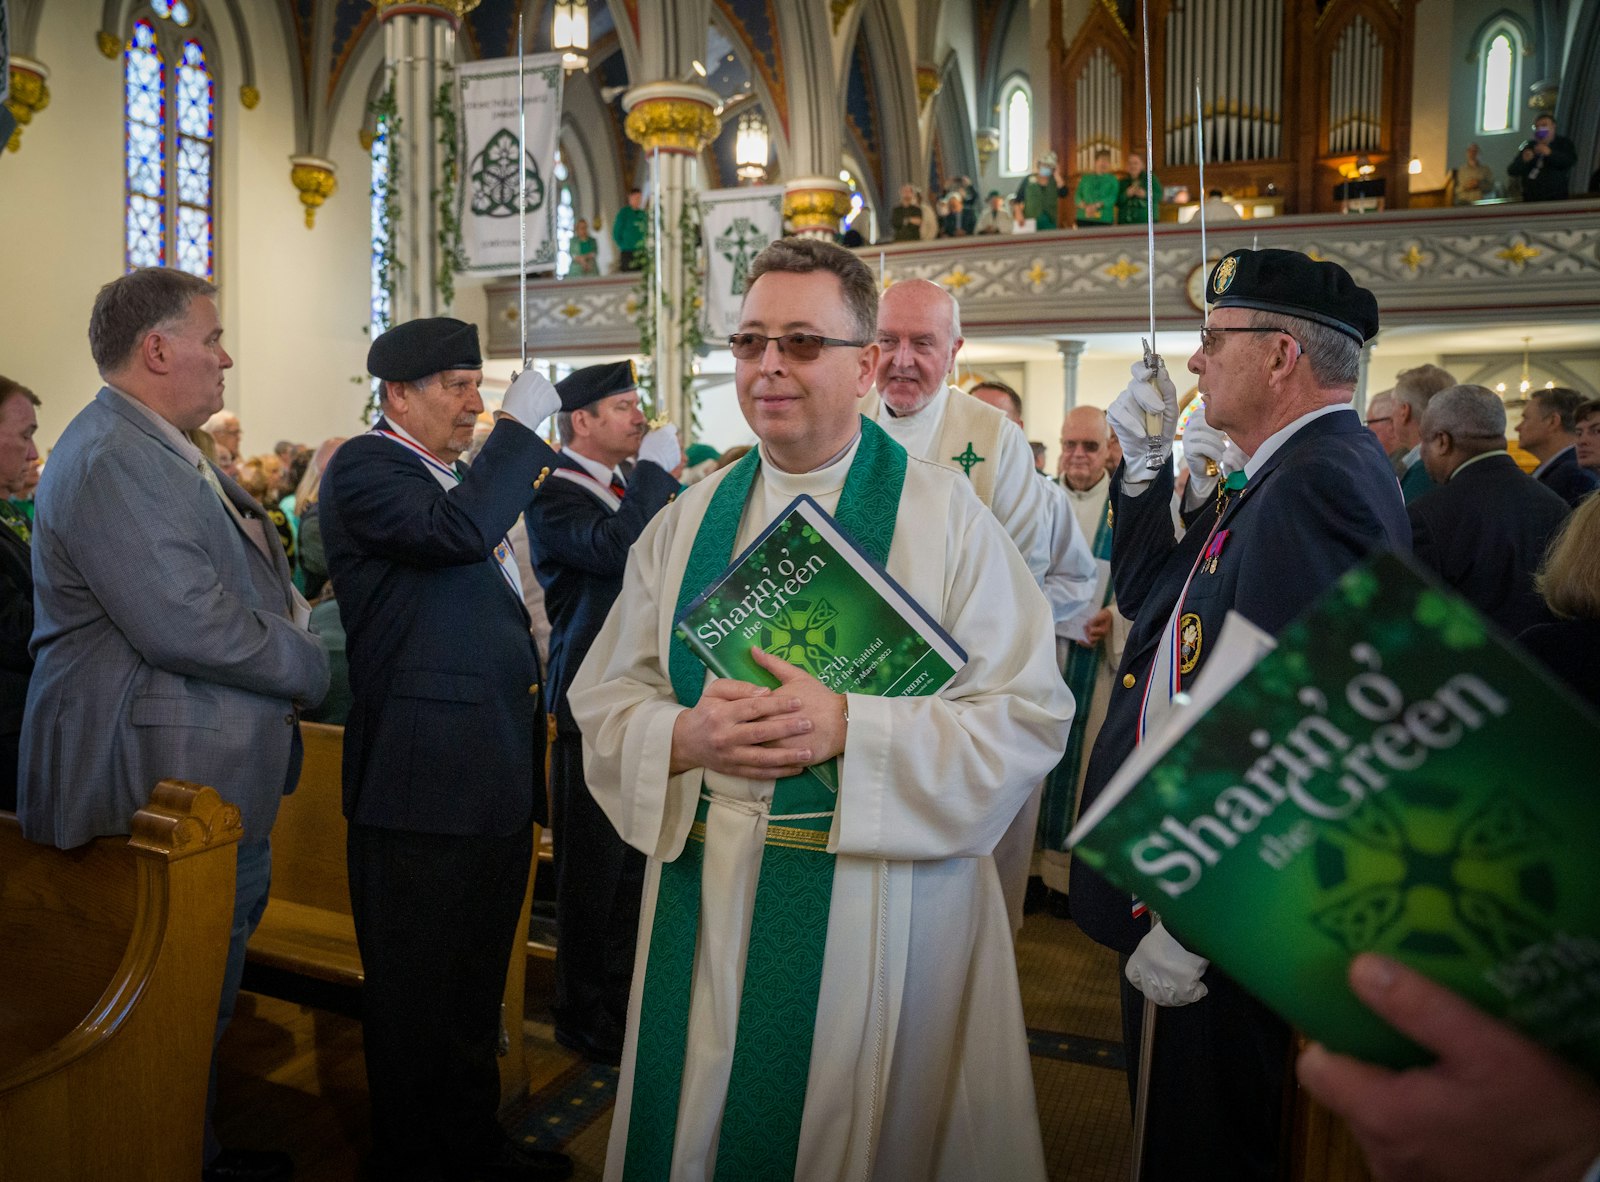 Fr. Brendan McCarrick, SAC, pastor of St. Vincent Pallotti Parish in Wyandotte, holds a "Sharin' o' the Green" Mass booklet as he processes into the church, flanked by members of the Knights of Columbus honor guard.